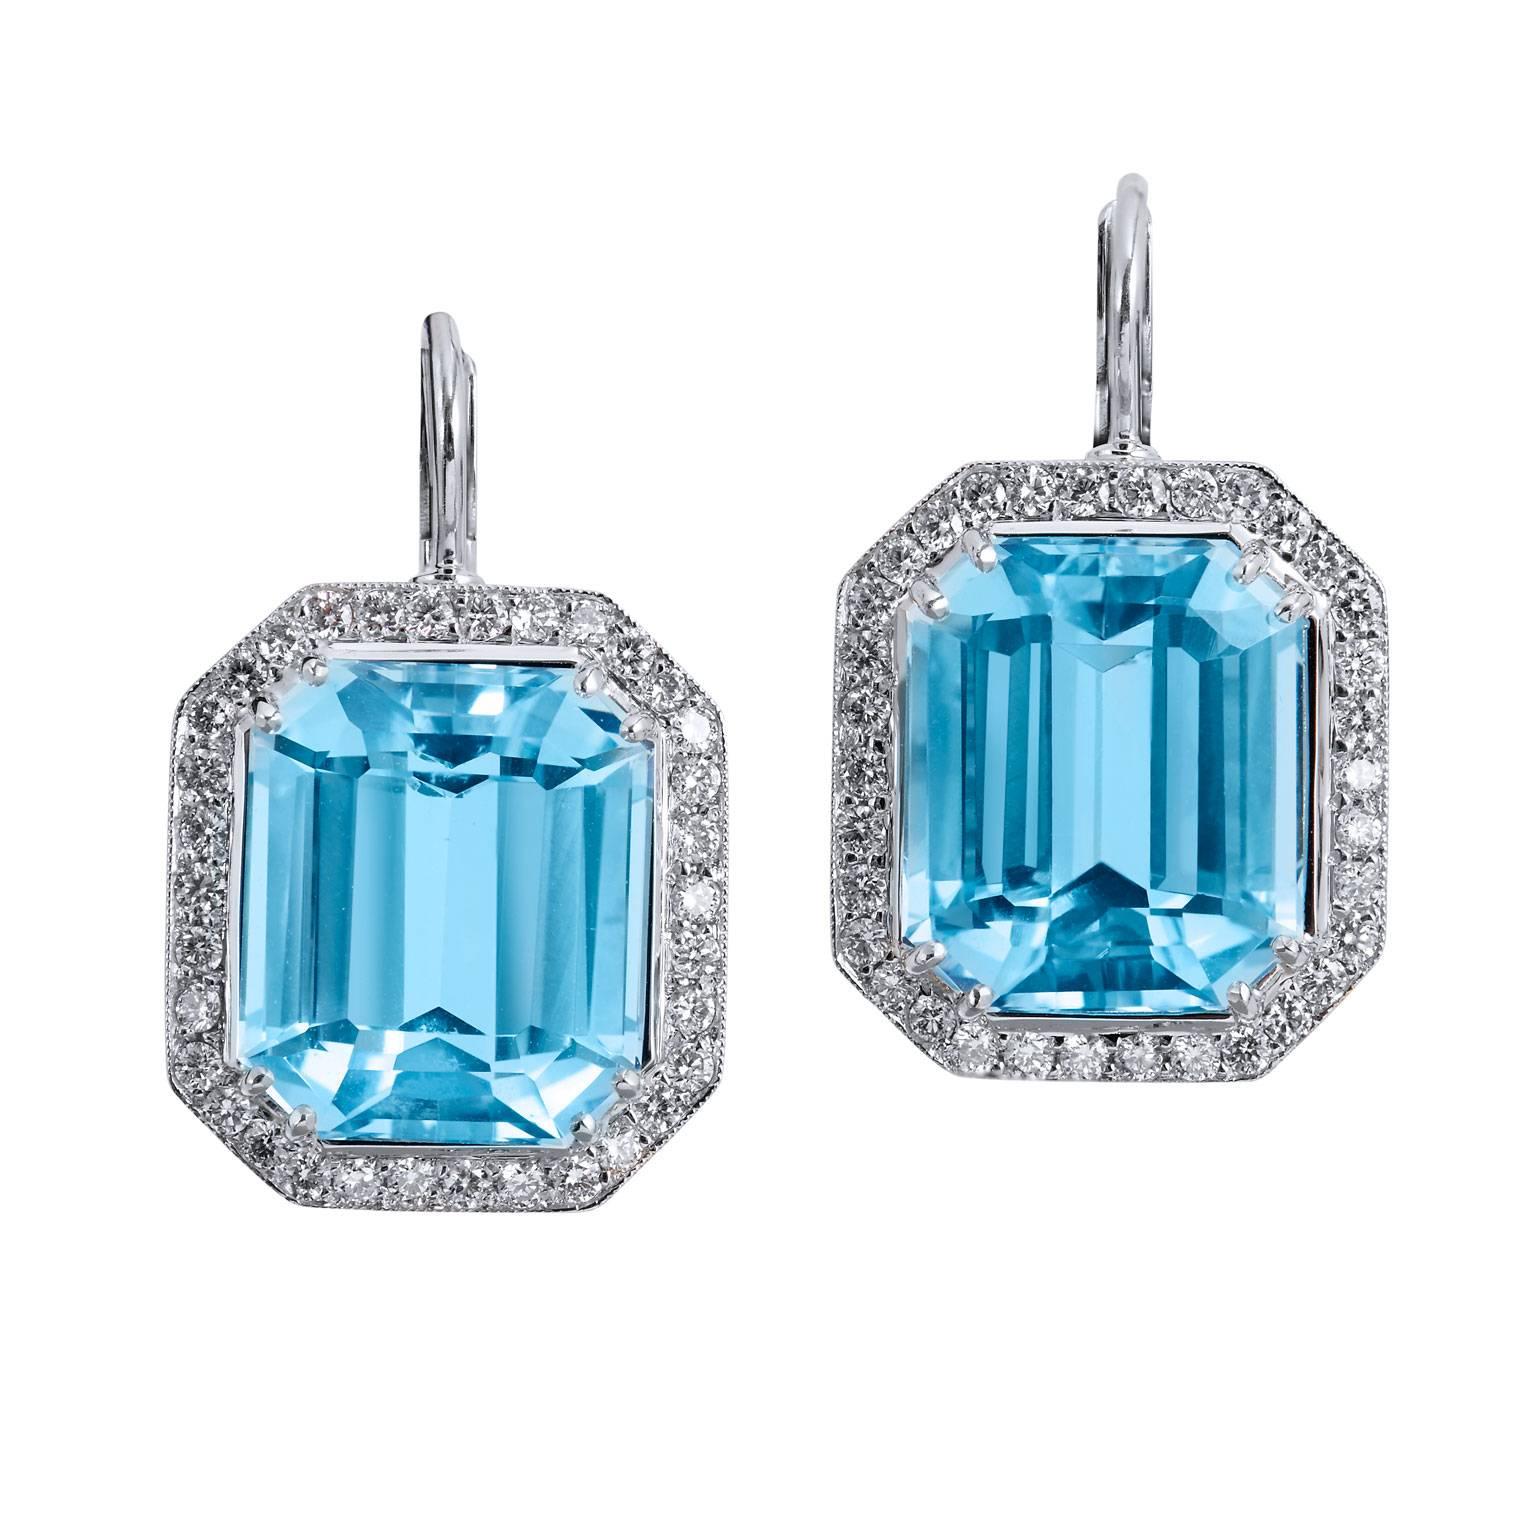 H & H 18.29 Carat Blue Topaz and Diamond Pave Lever-Back Earrings